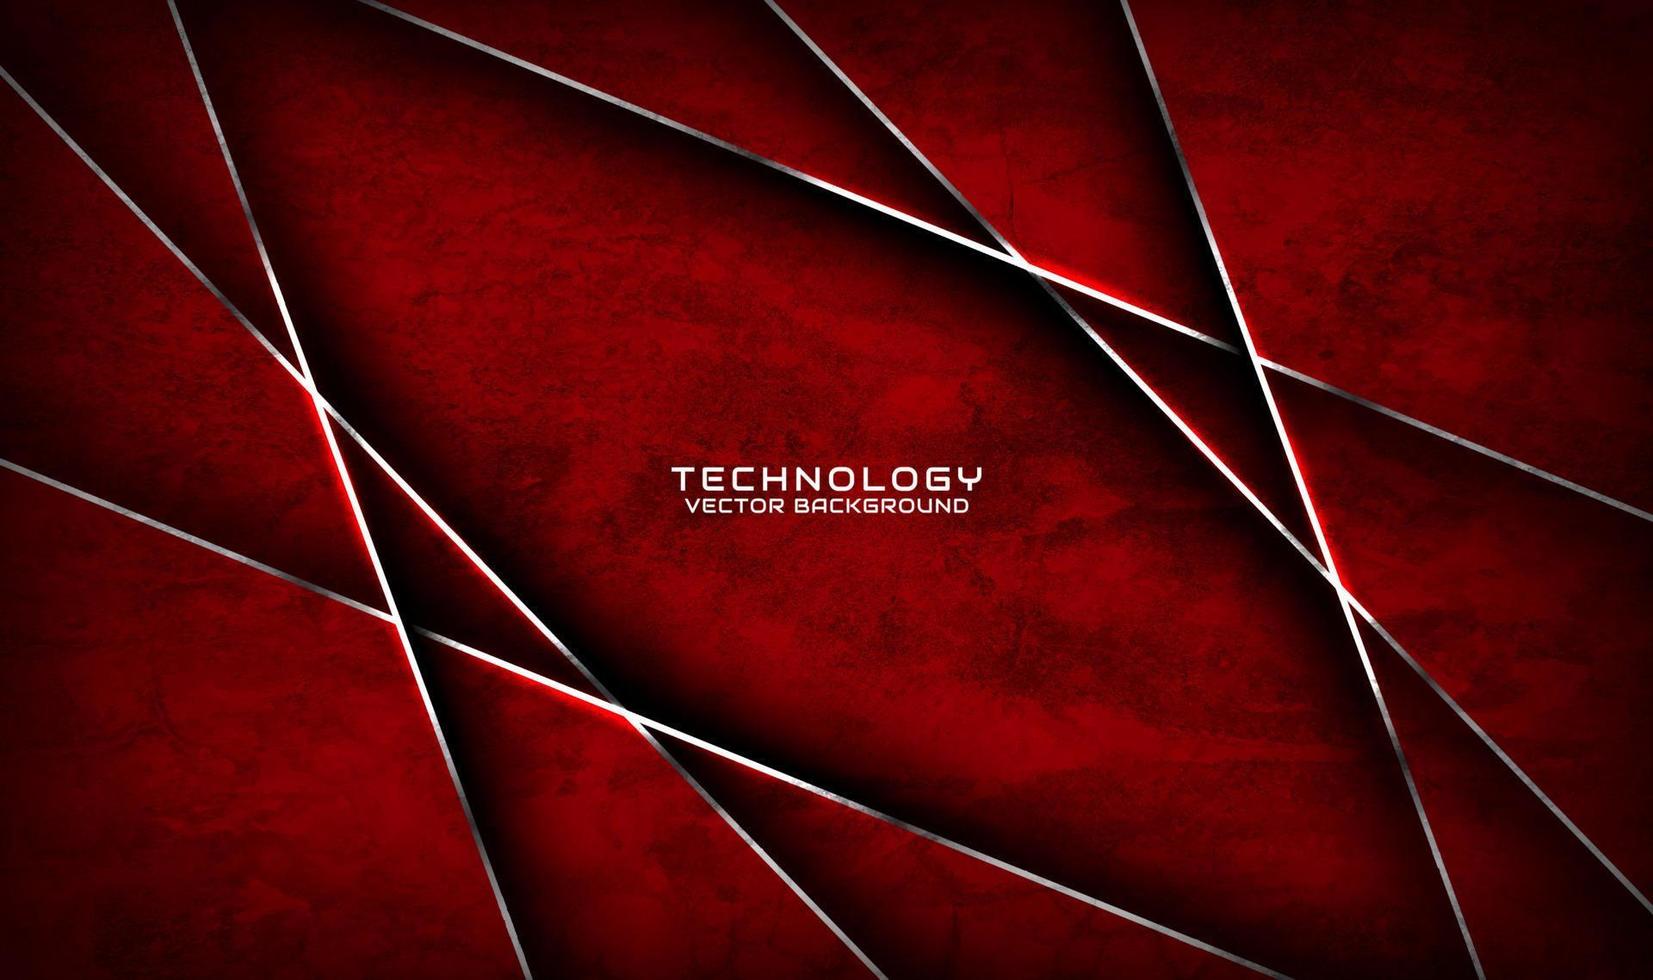 3D red rough grunge techno abstract background overlap layer on dark space with silver lines decoration. Modern graphic design element cutout style concept for banner, flyer, card, or brochure cover vector